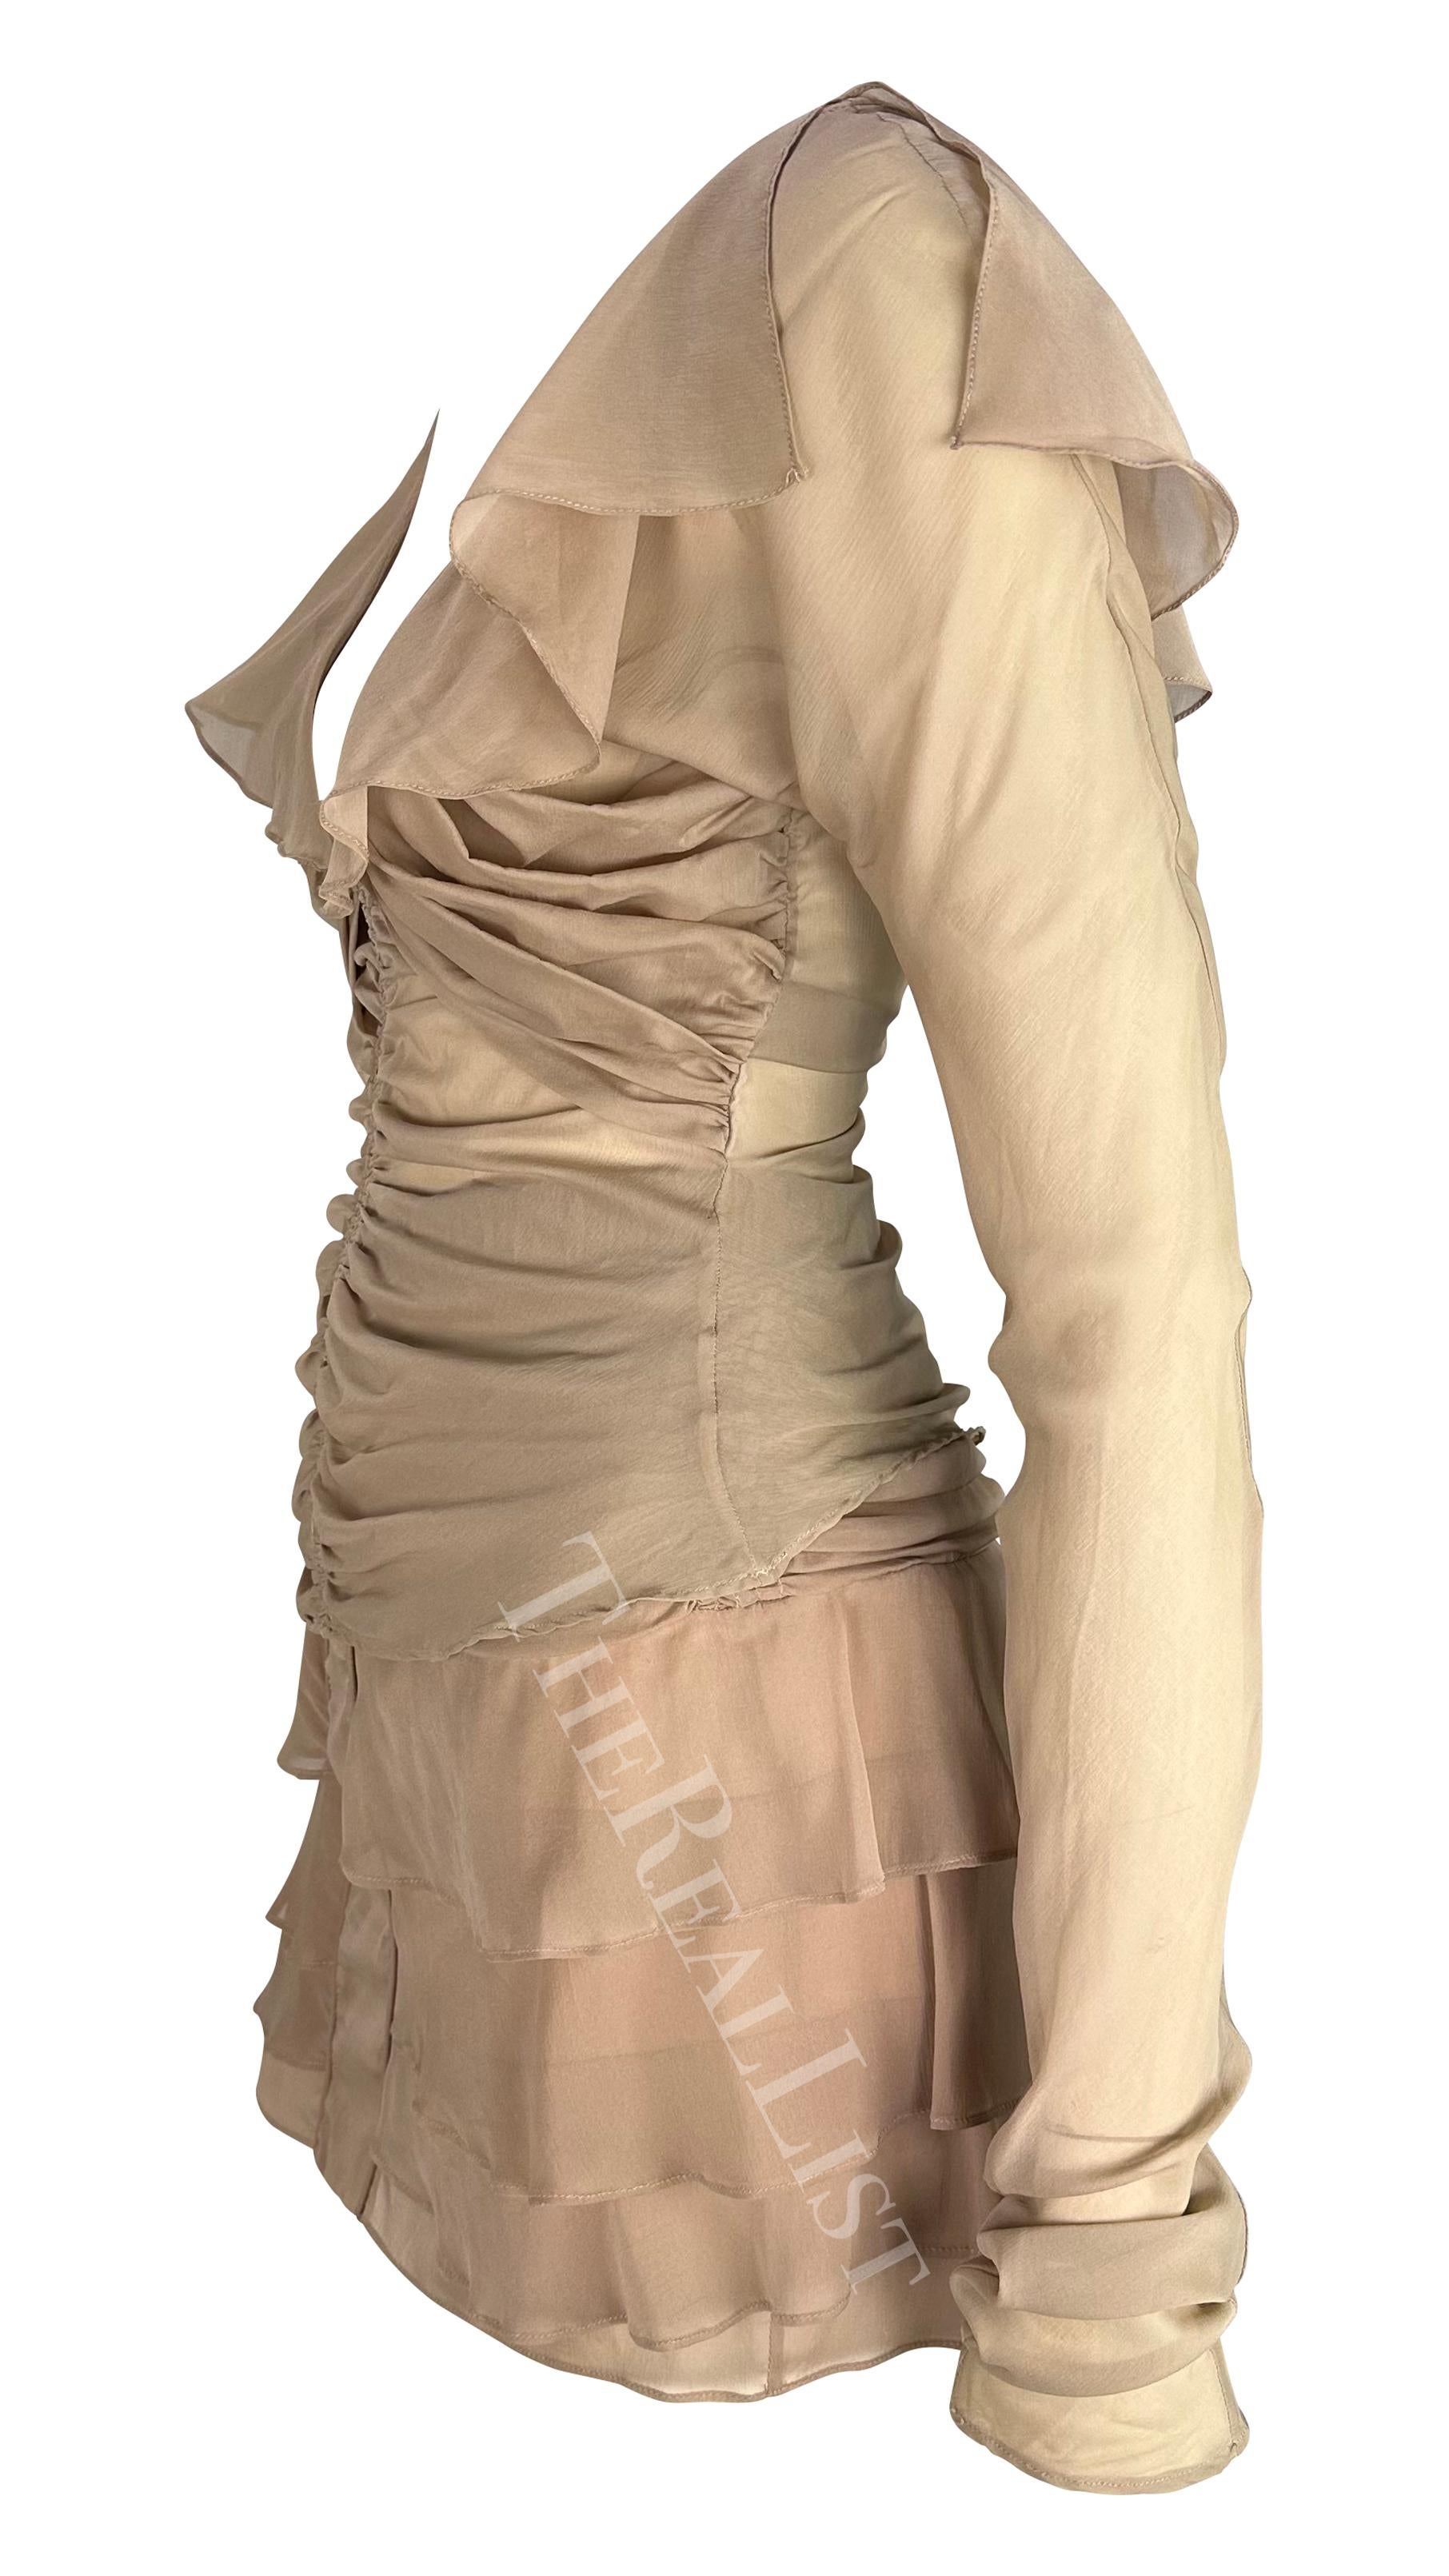 S/S 2003 Gucci by Tom Ford Dusty Pink Beige Sheer Chiffon Ruffle Skirt Set For Sale 2